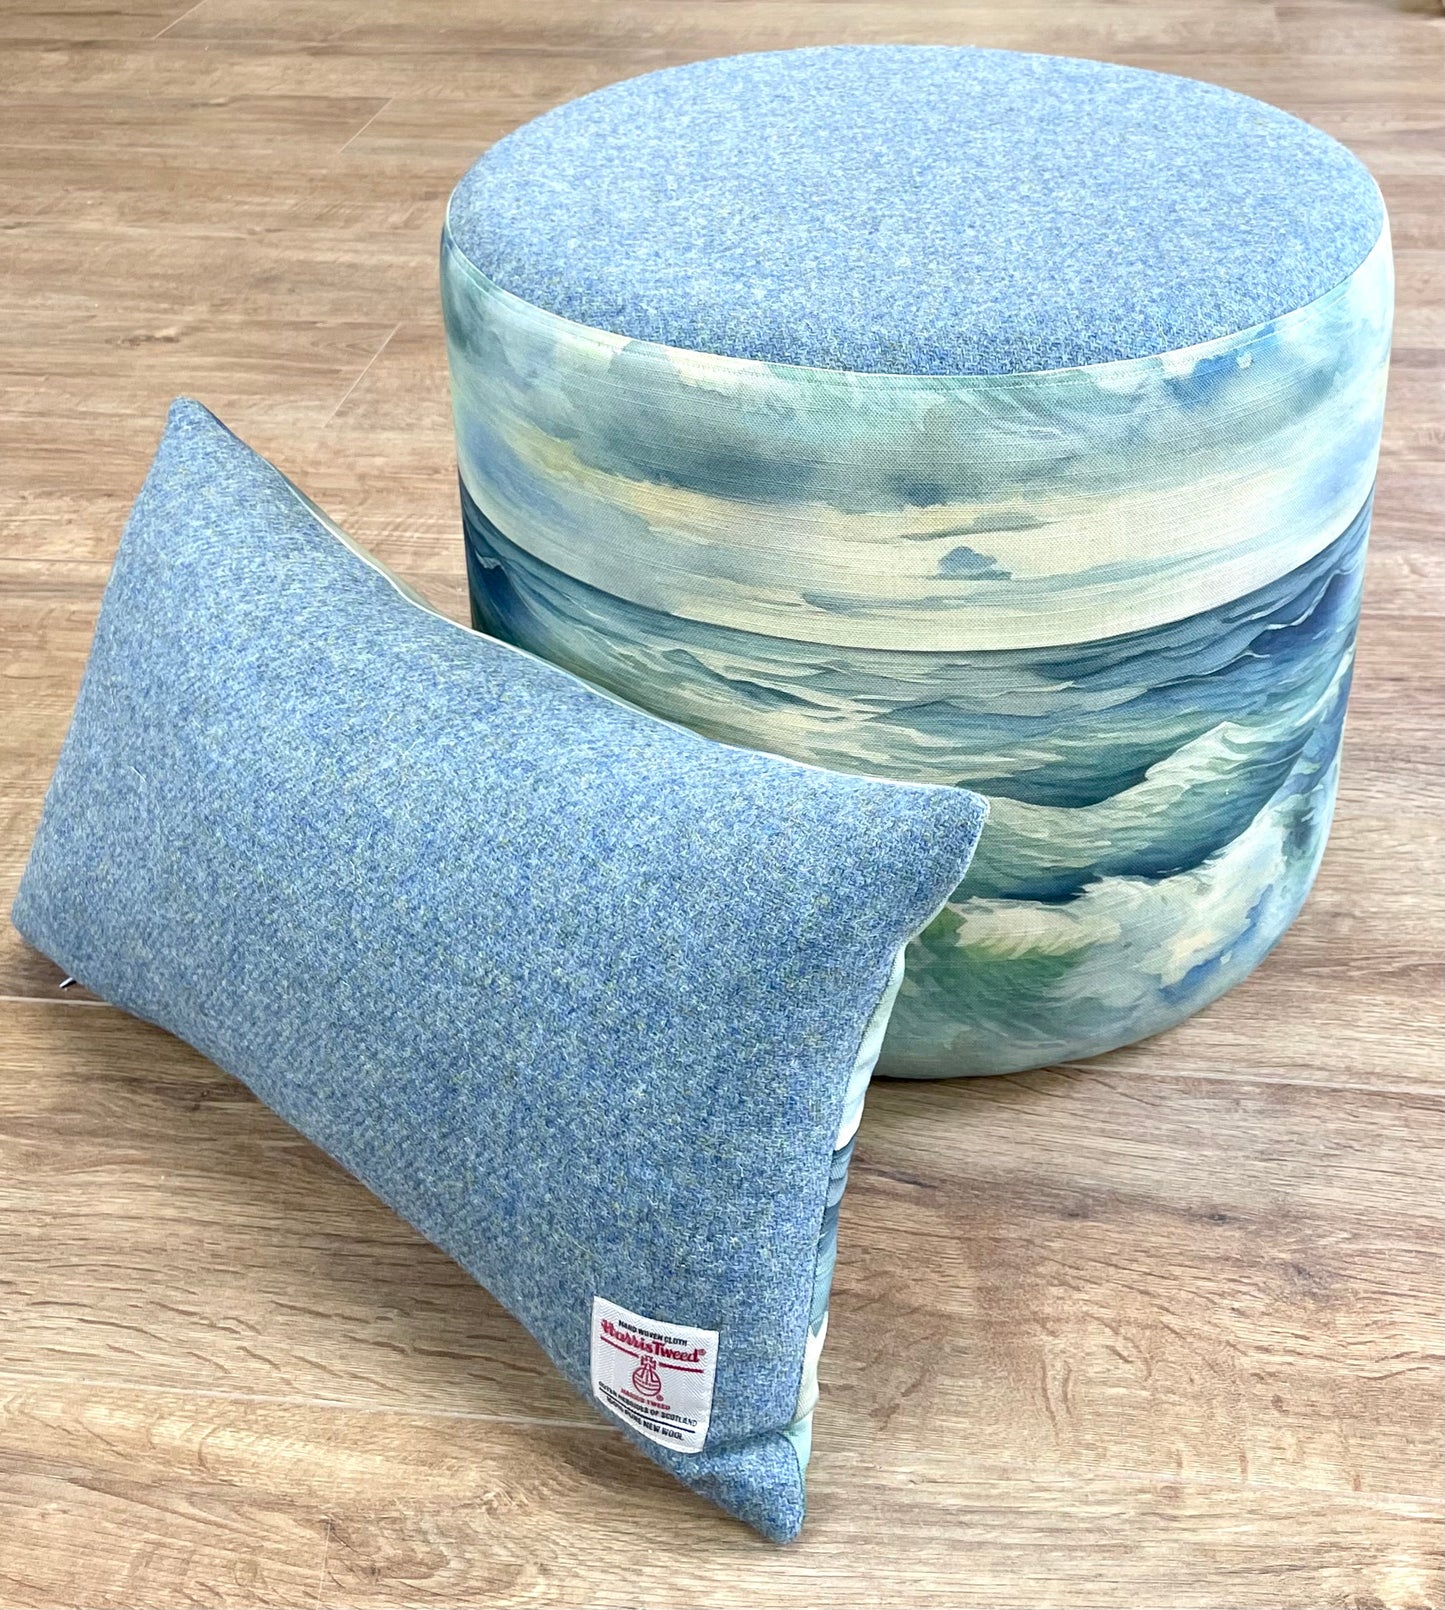 Stormy Sea Linen and Light Blue Harris Tweed Oblong Cushion